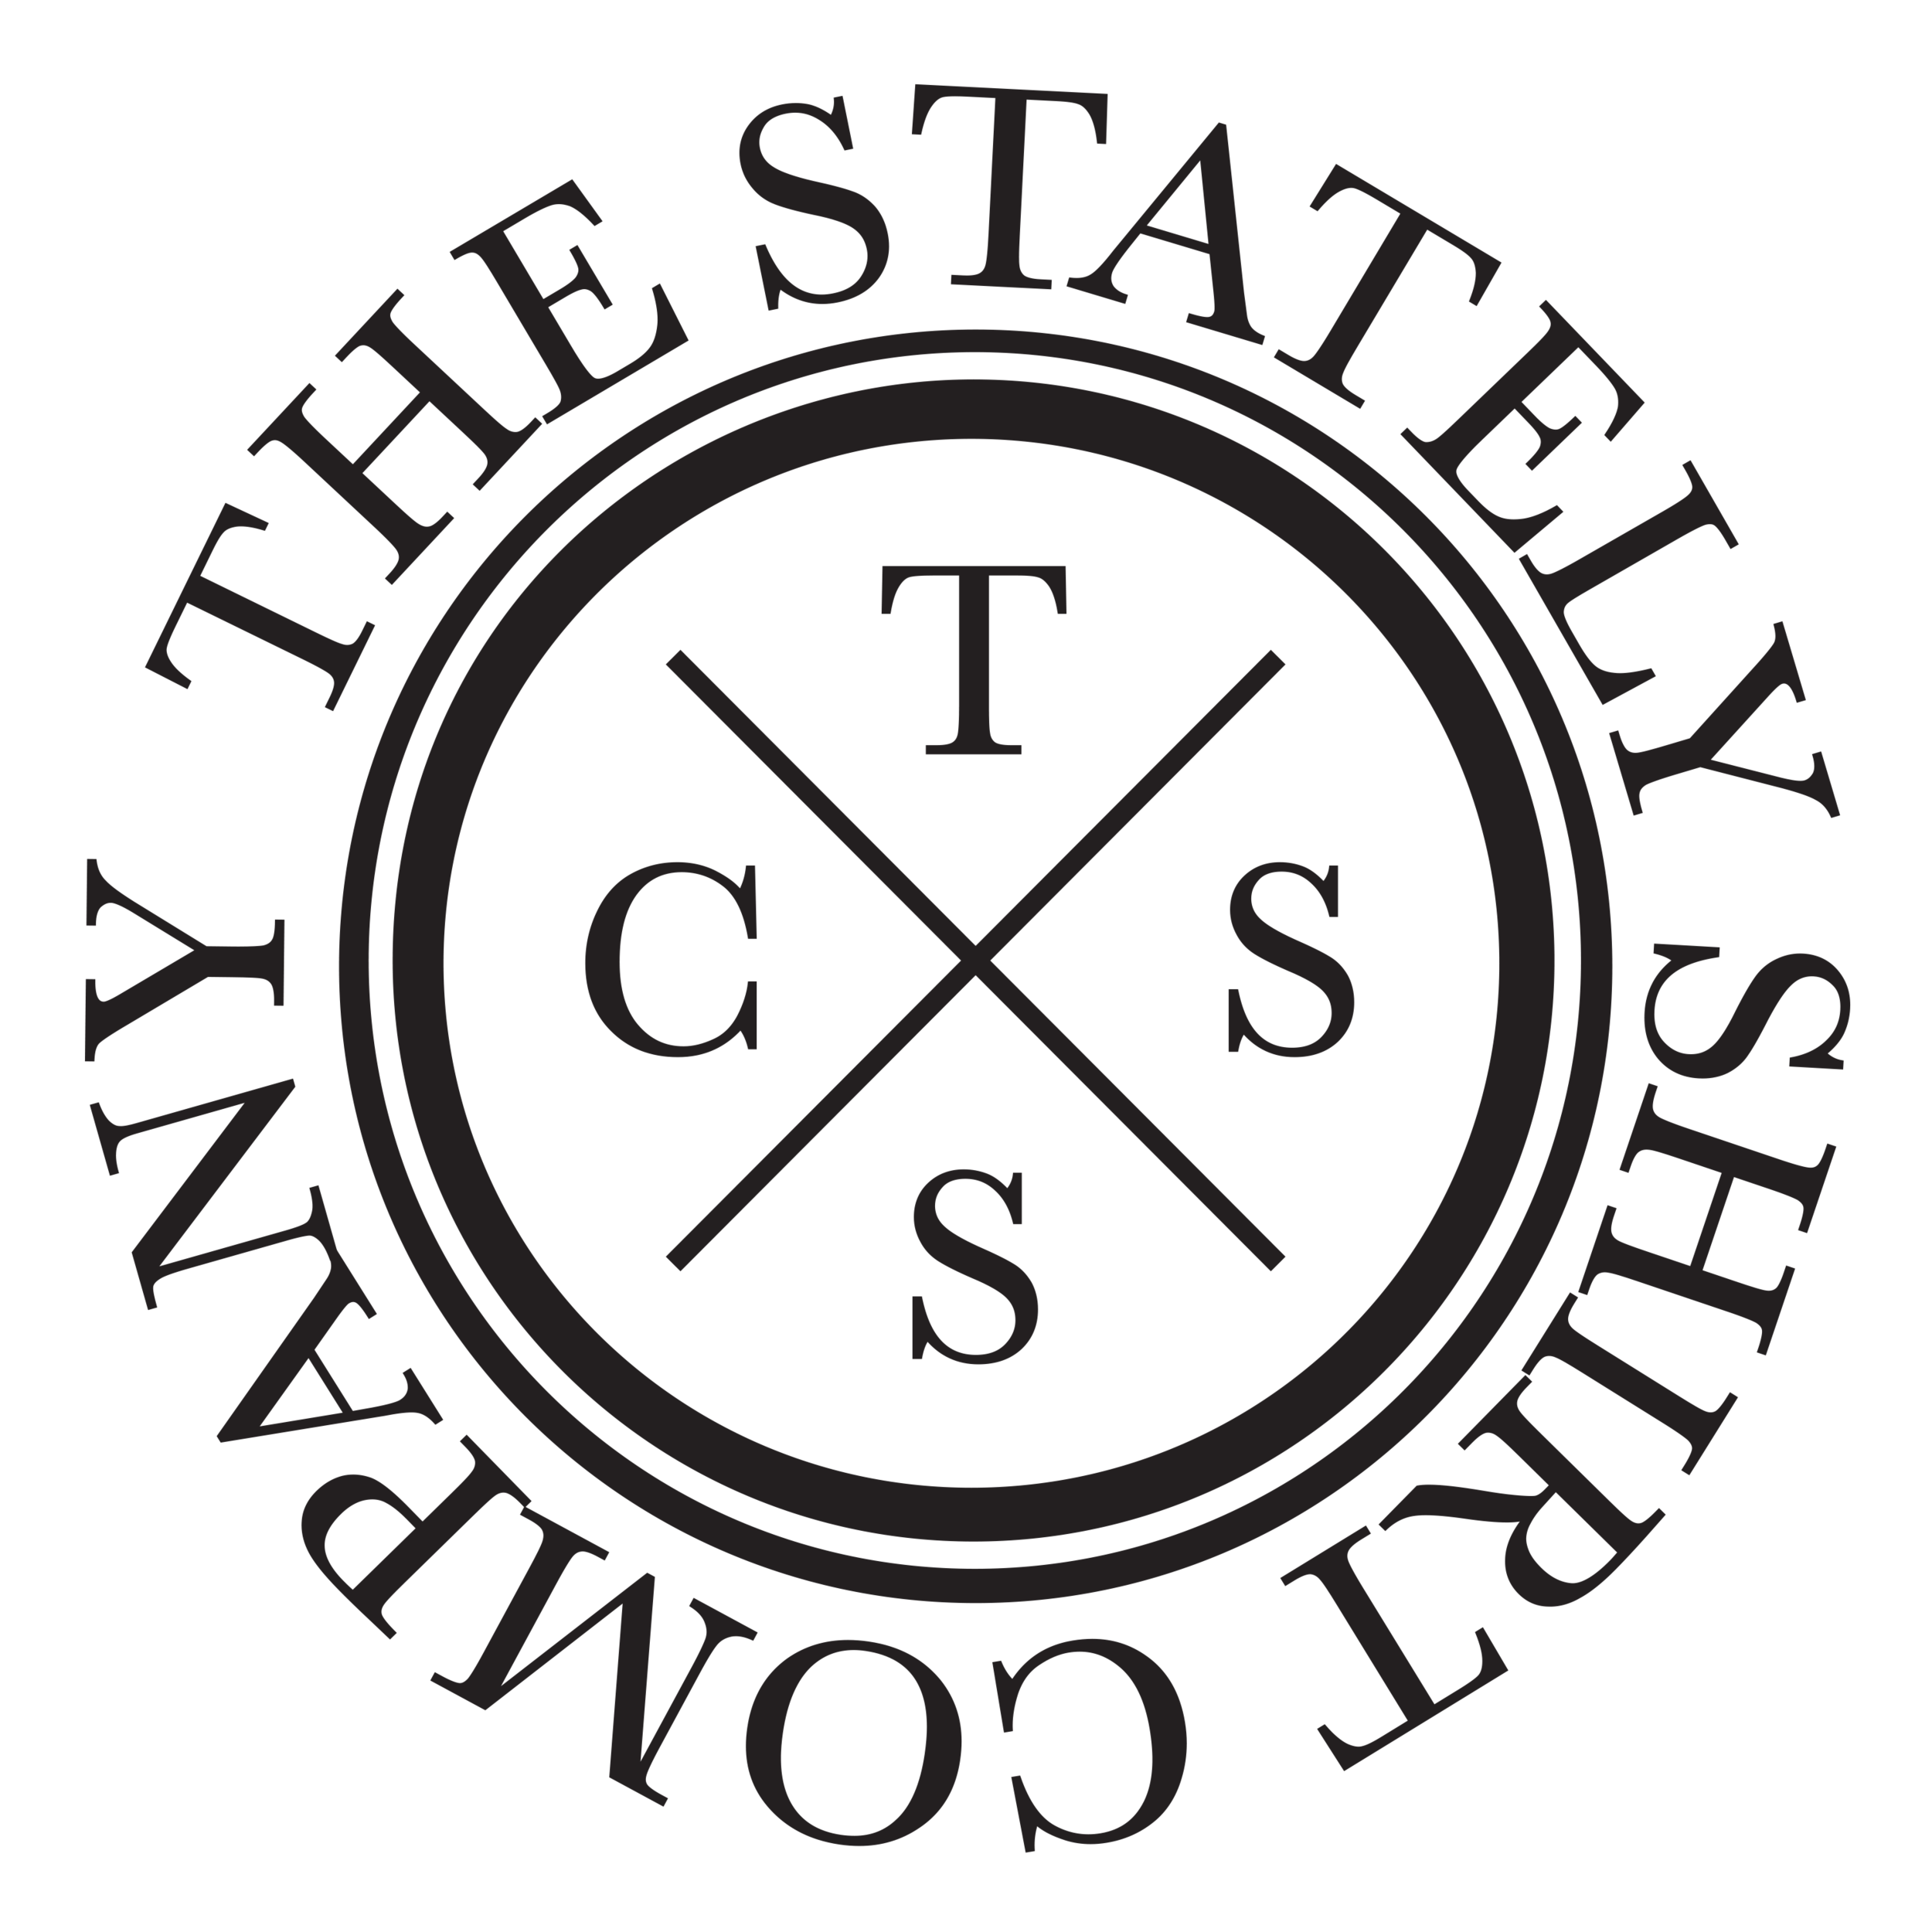  The Stately Shirt Co.